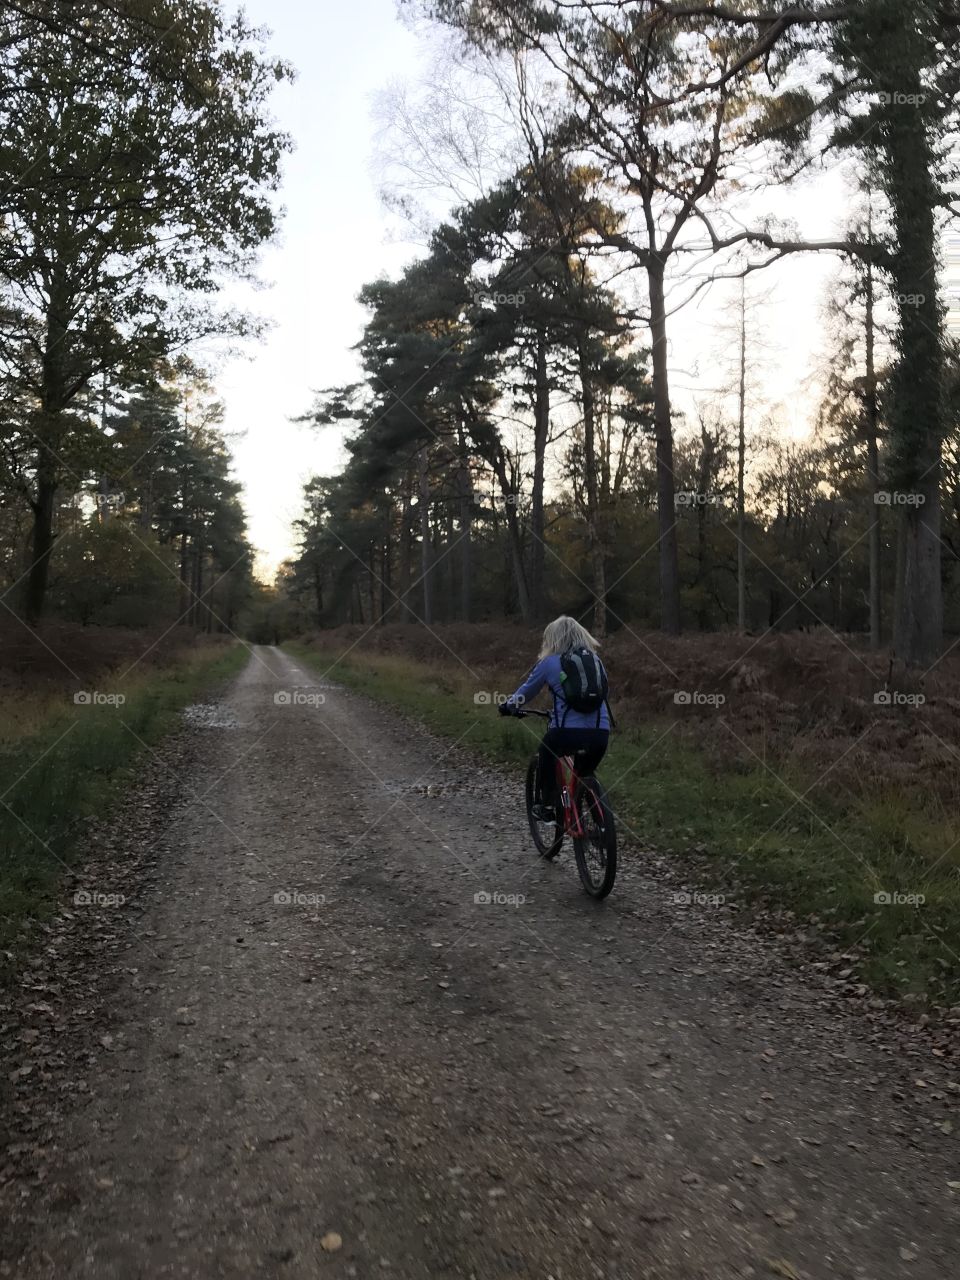 Exploring the new forest by mountain bike at sunset in the autumn time.